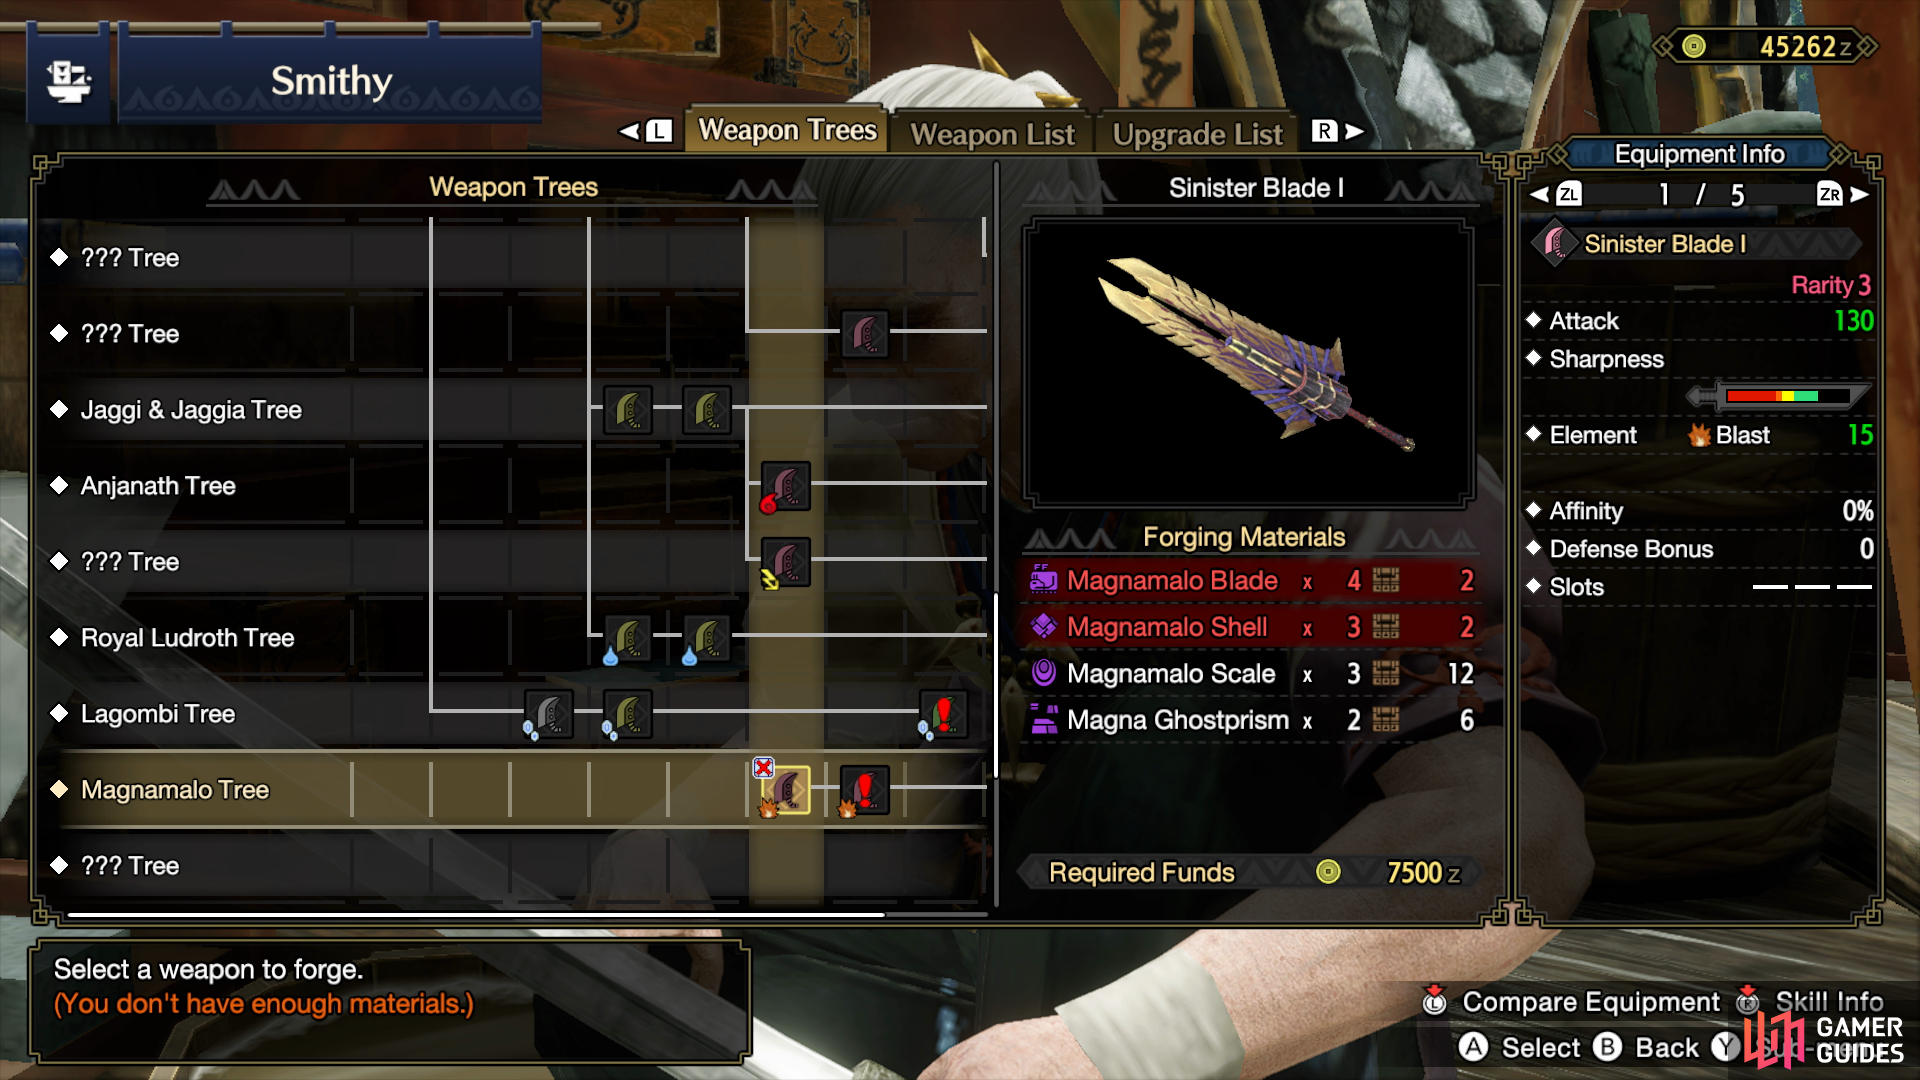 The Sinister Blade I requires Magnamalo Blades to craft.